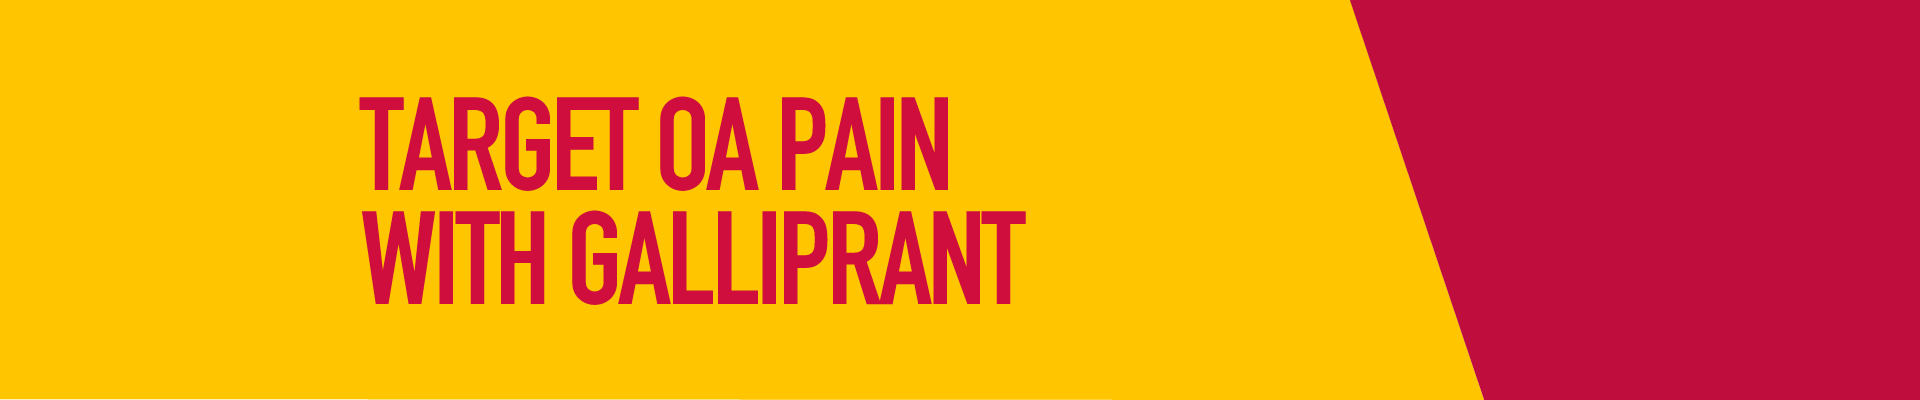 pain-relief-banner